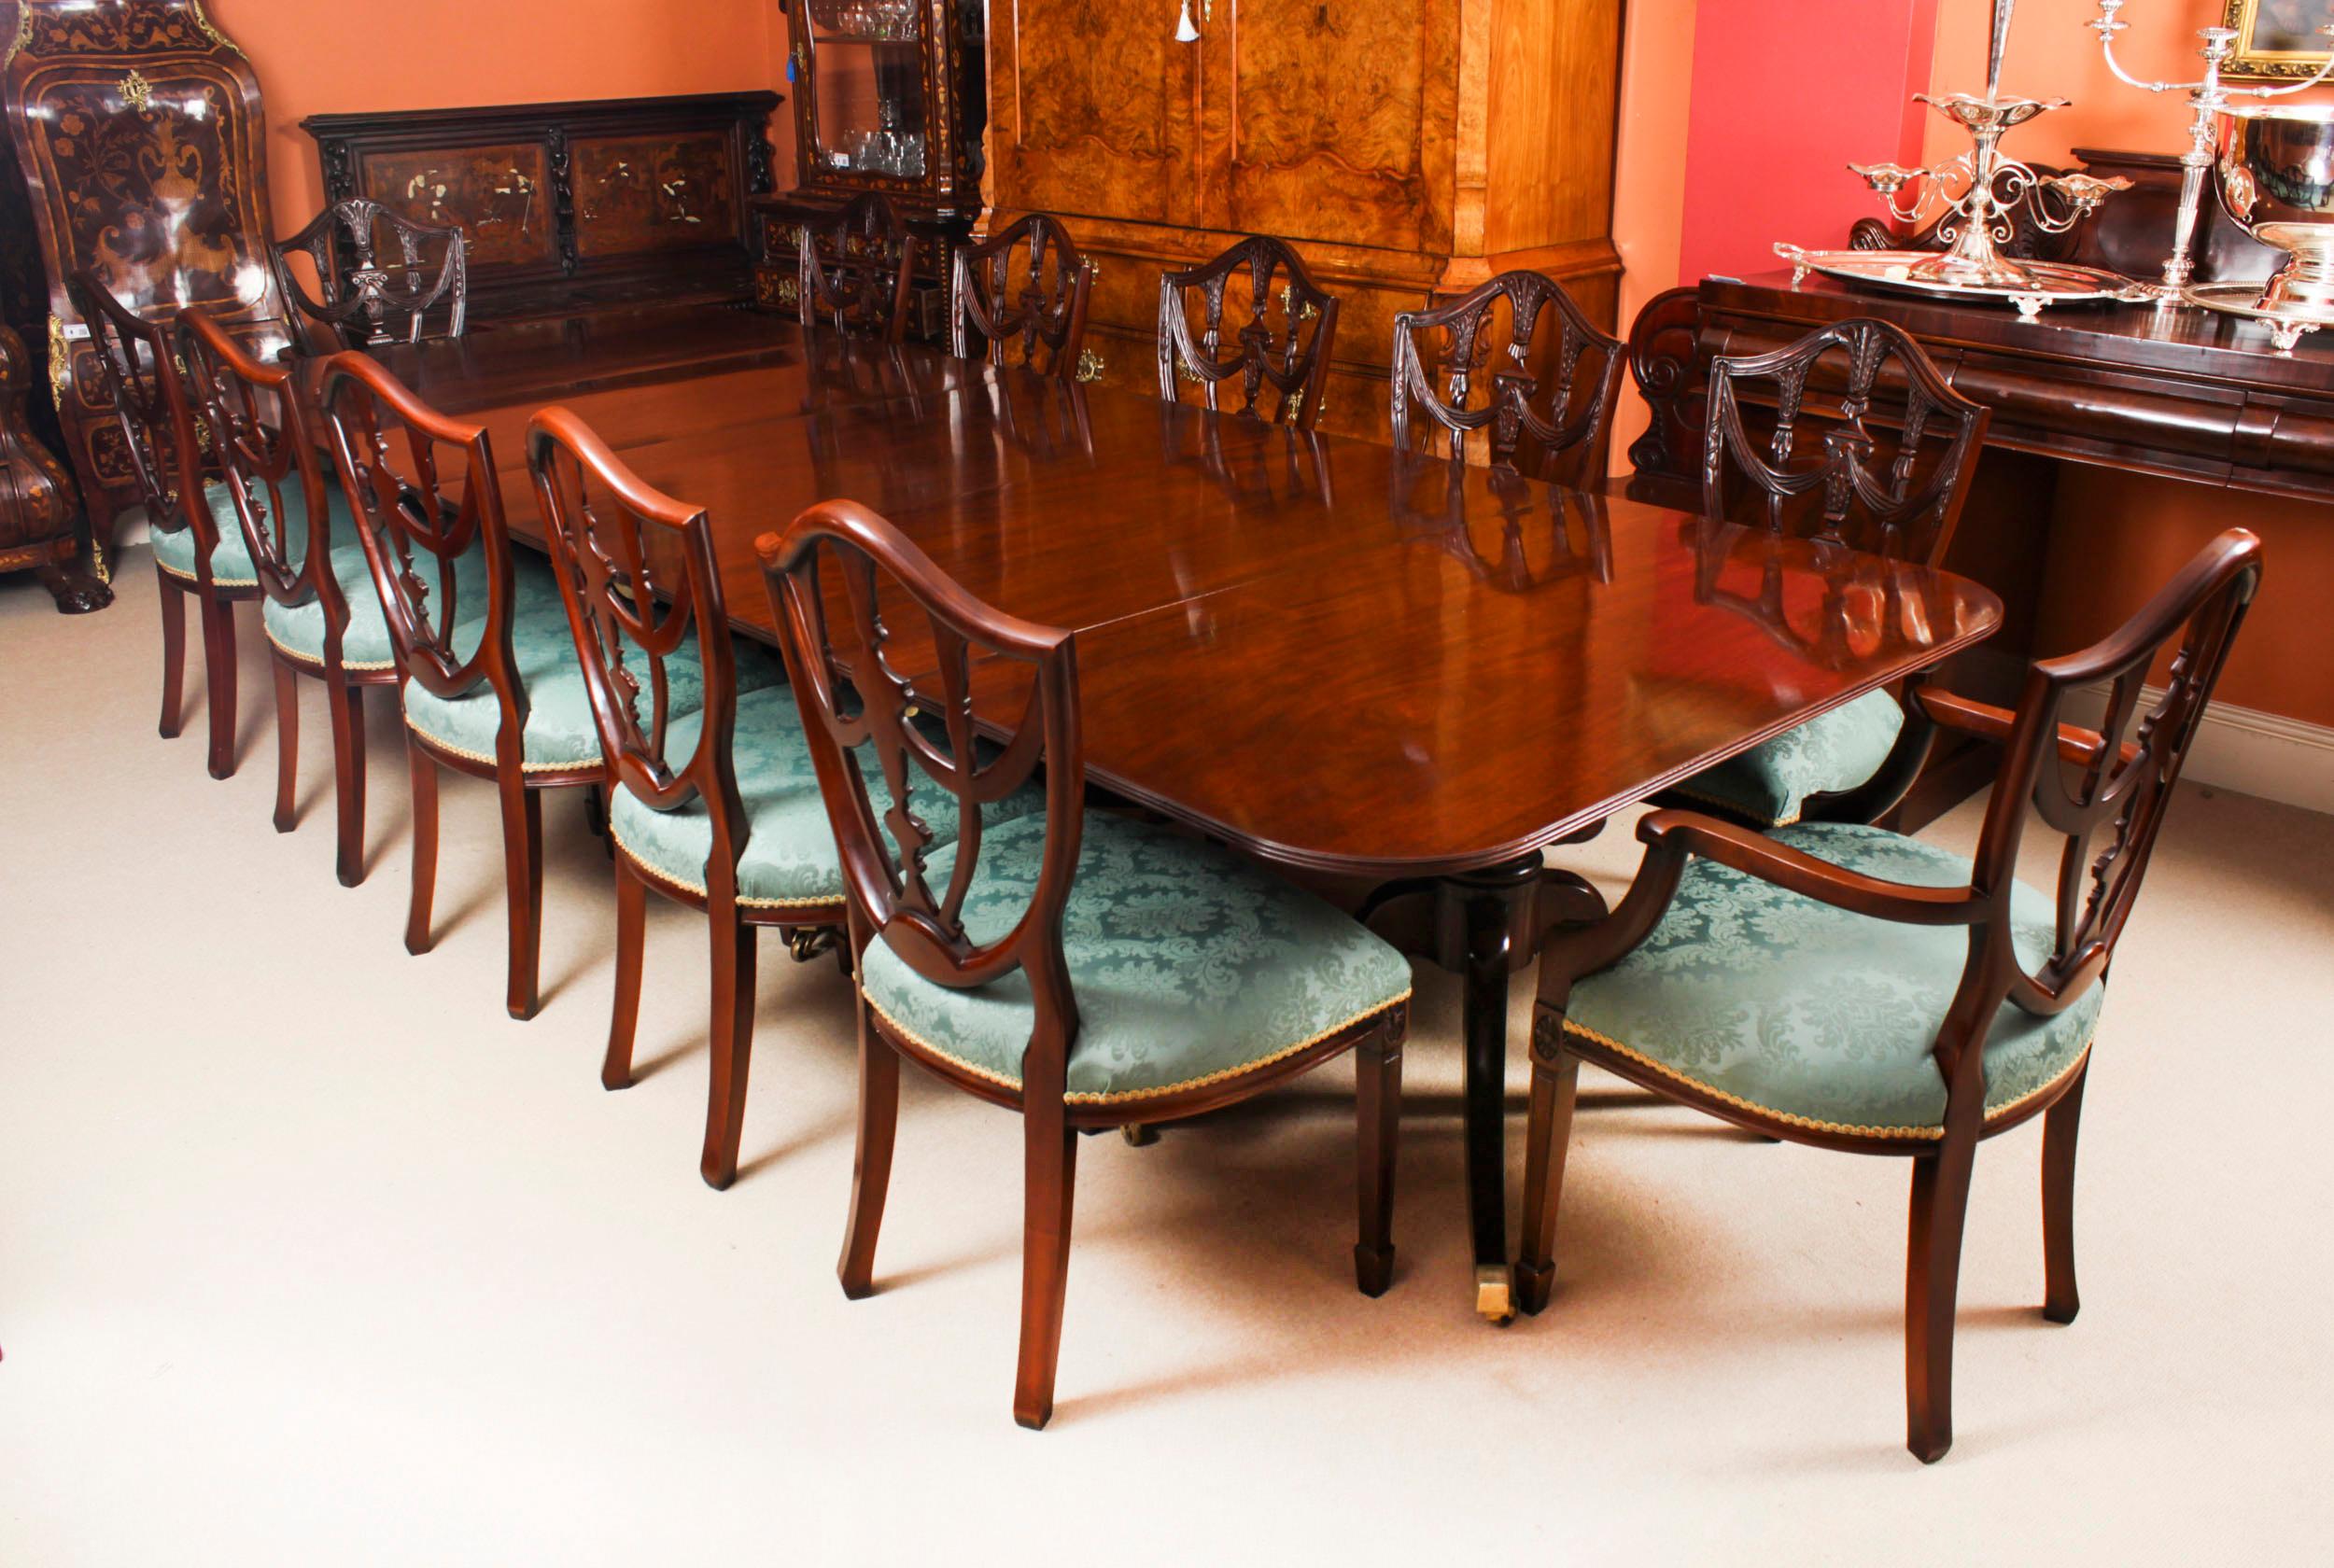 This is an elegant antique Regency dining table that can comfortable seat twelve people, circa 1830 in date.

The table features elegant simplicity, with straight, unbroken surfaces and lines.  It has two leaves which can be added or removed as